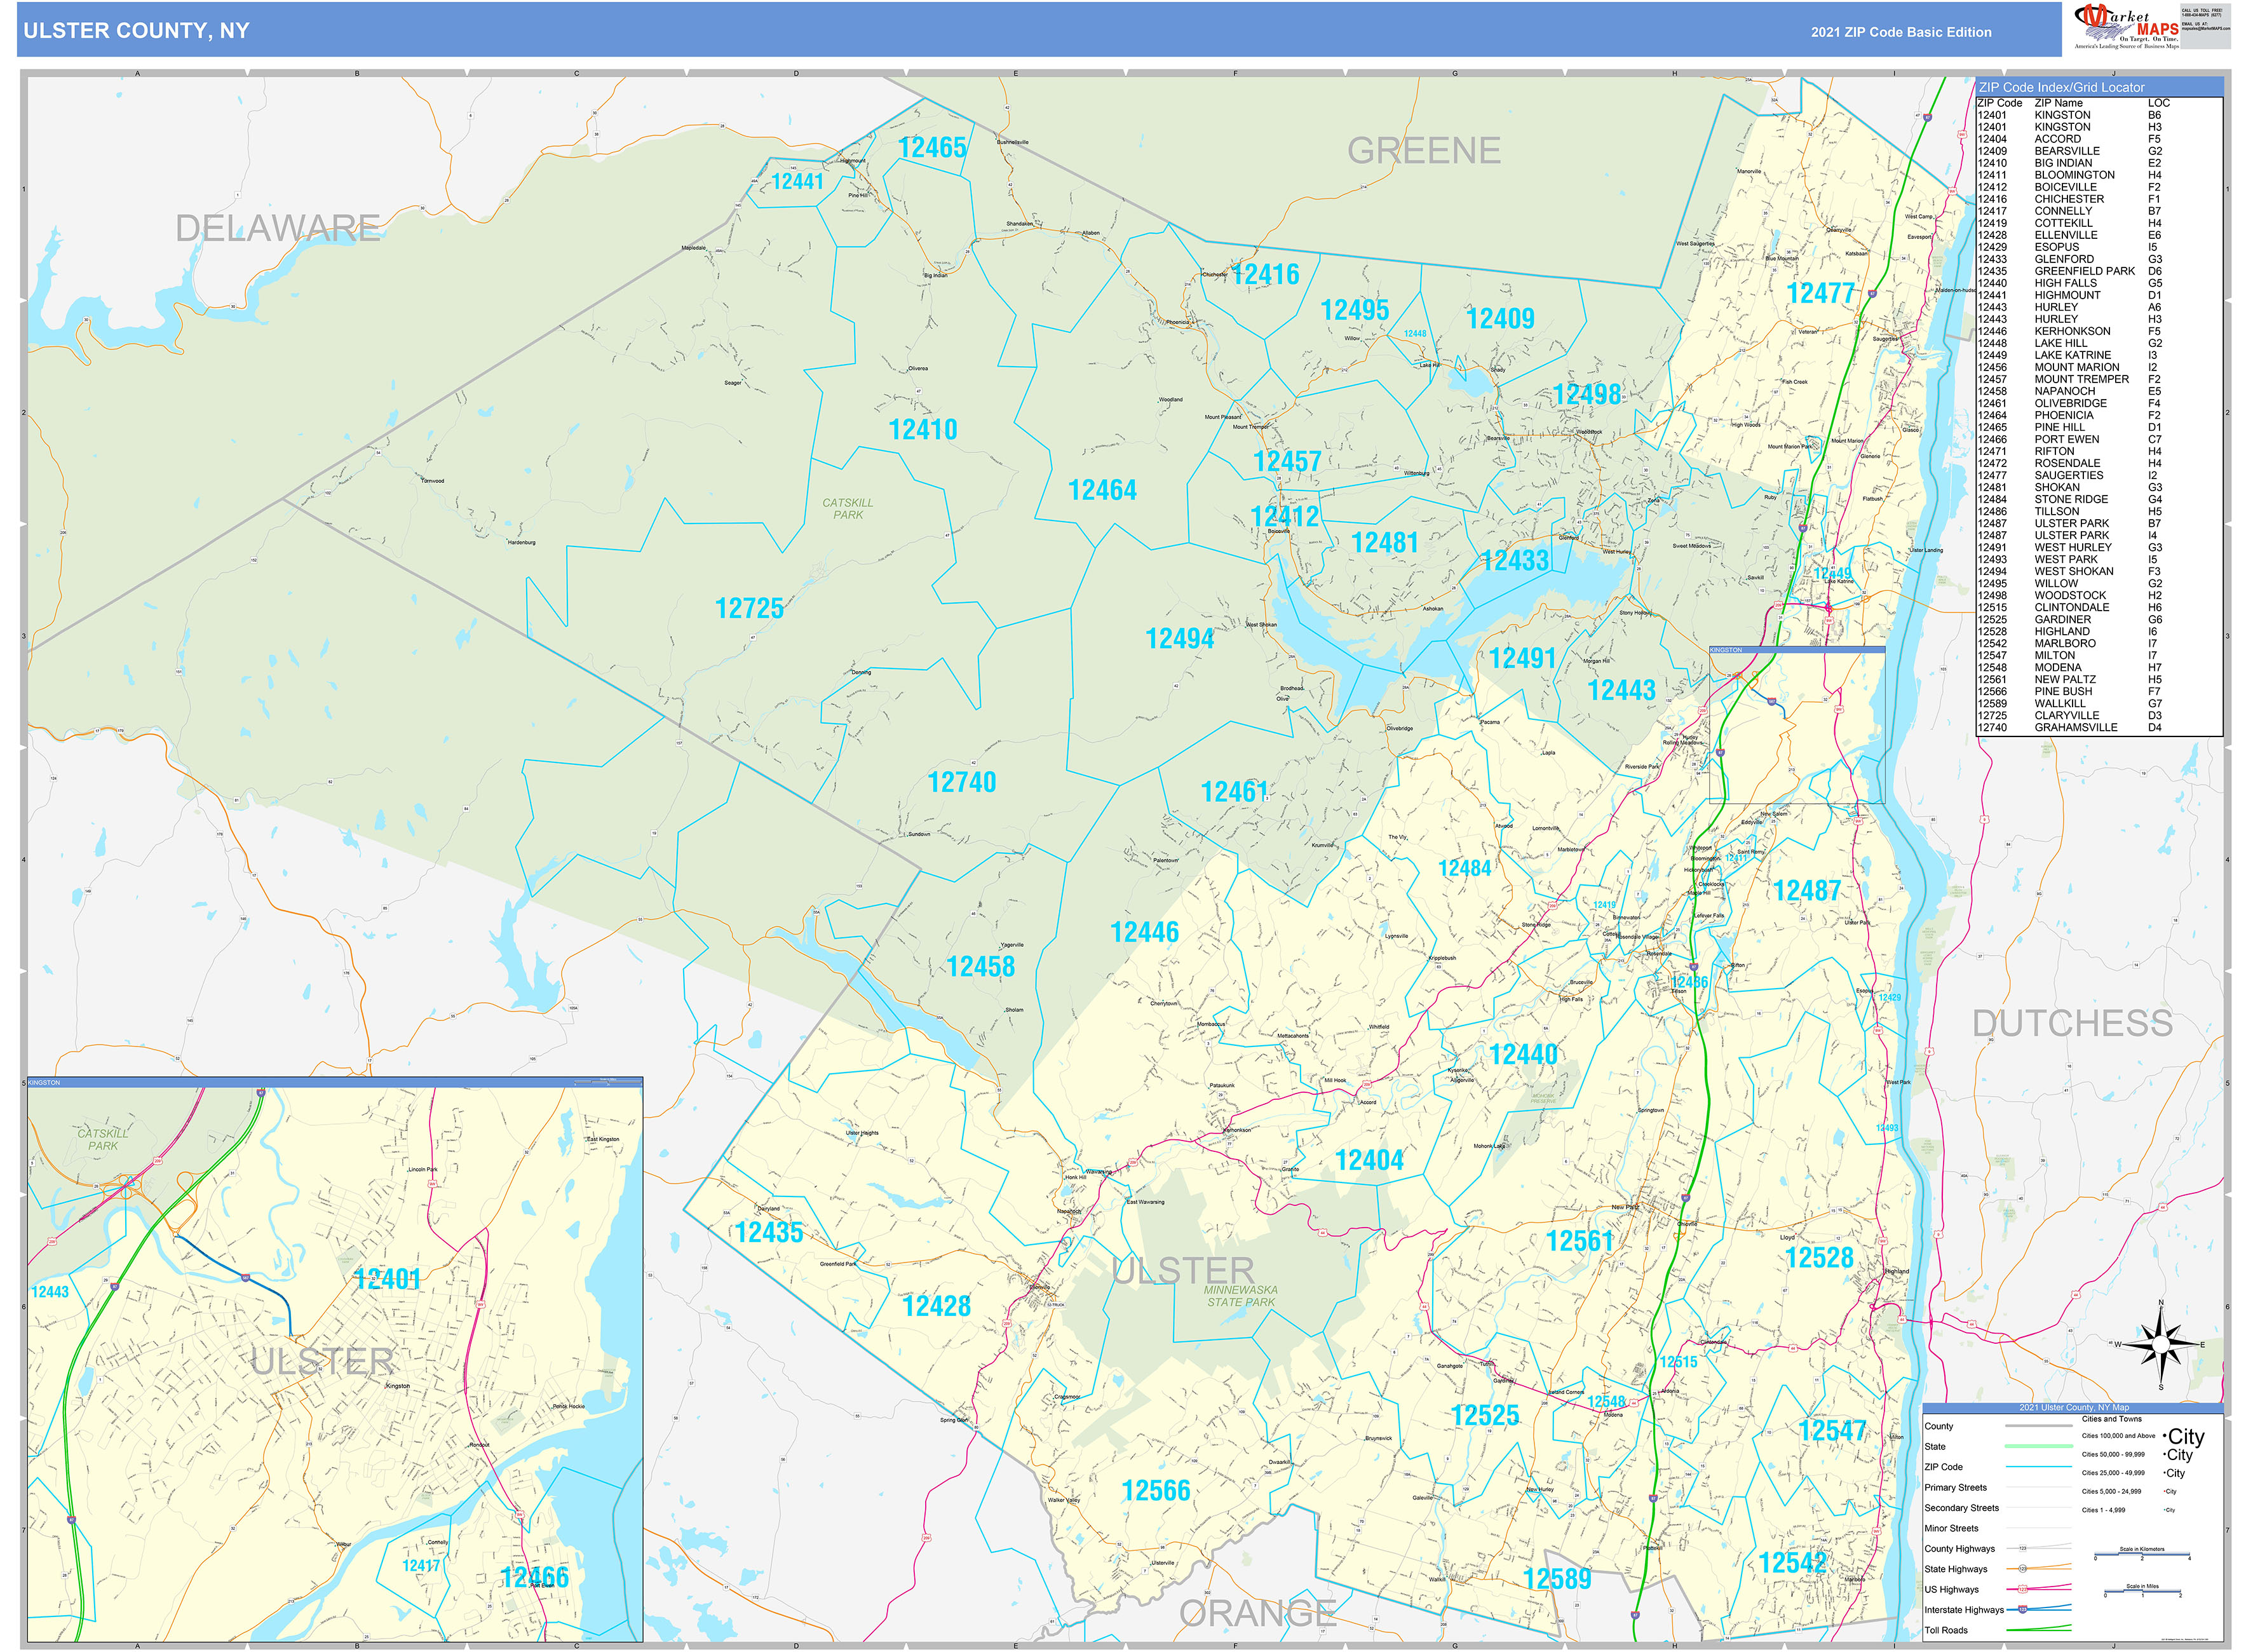 Ulster County Ny Zip Code Wall Map Basic Style By Marketmaps Mapsales 1314